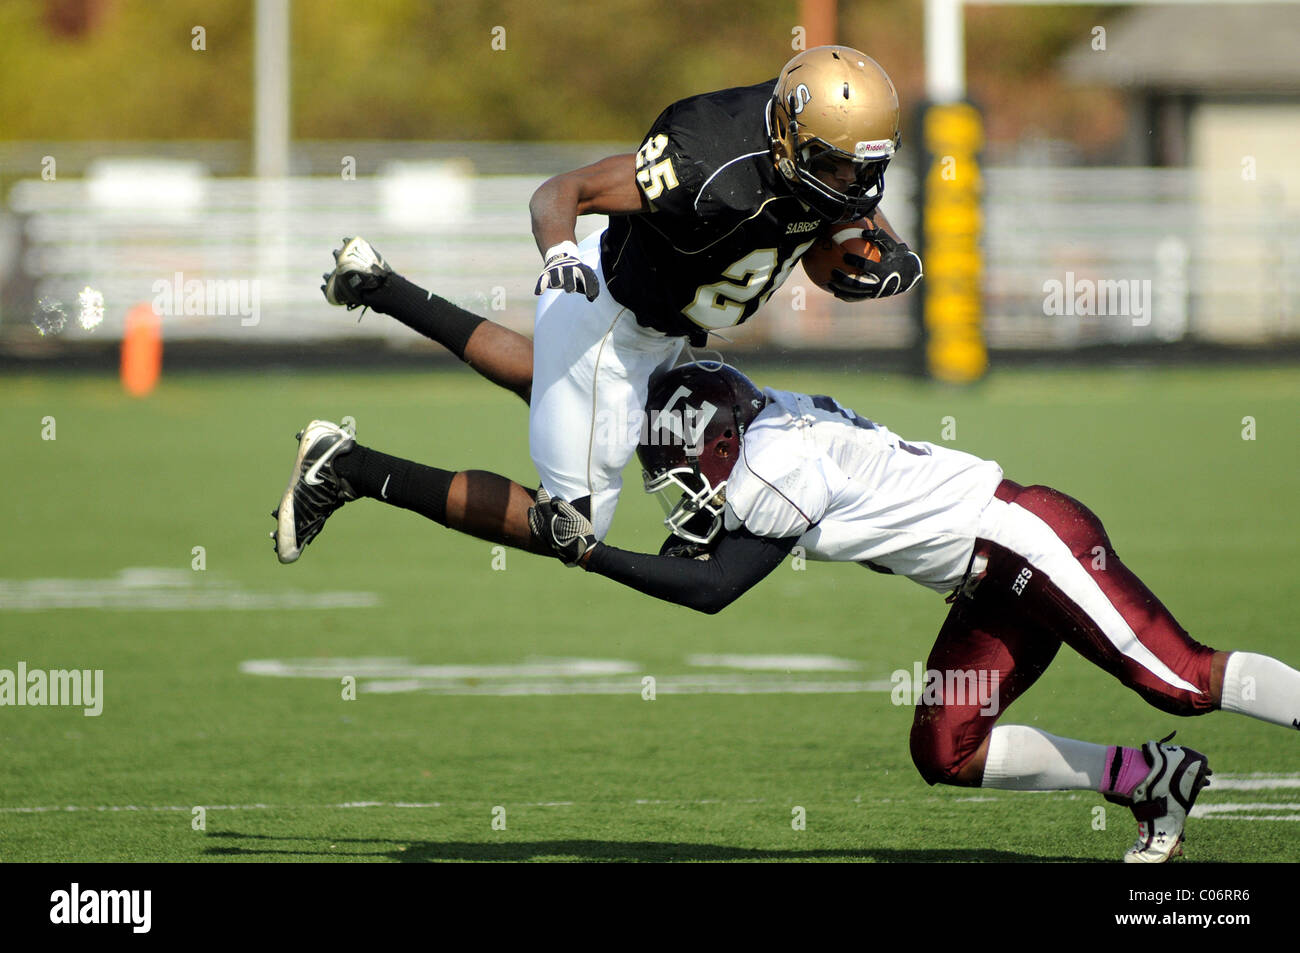 Running back taking the high road as he is upended by a tackle. USA. Stock Photo